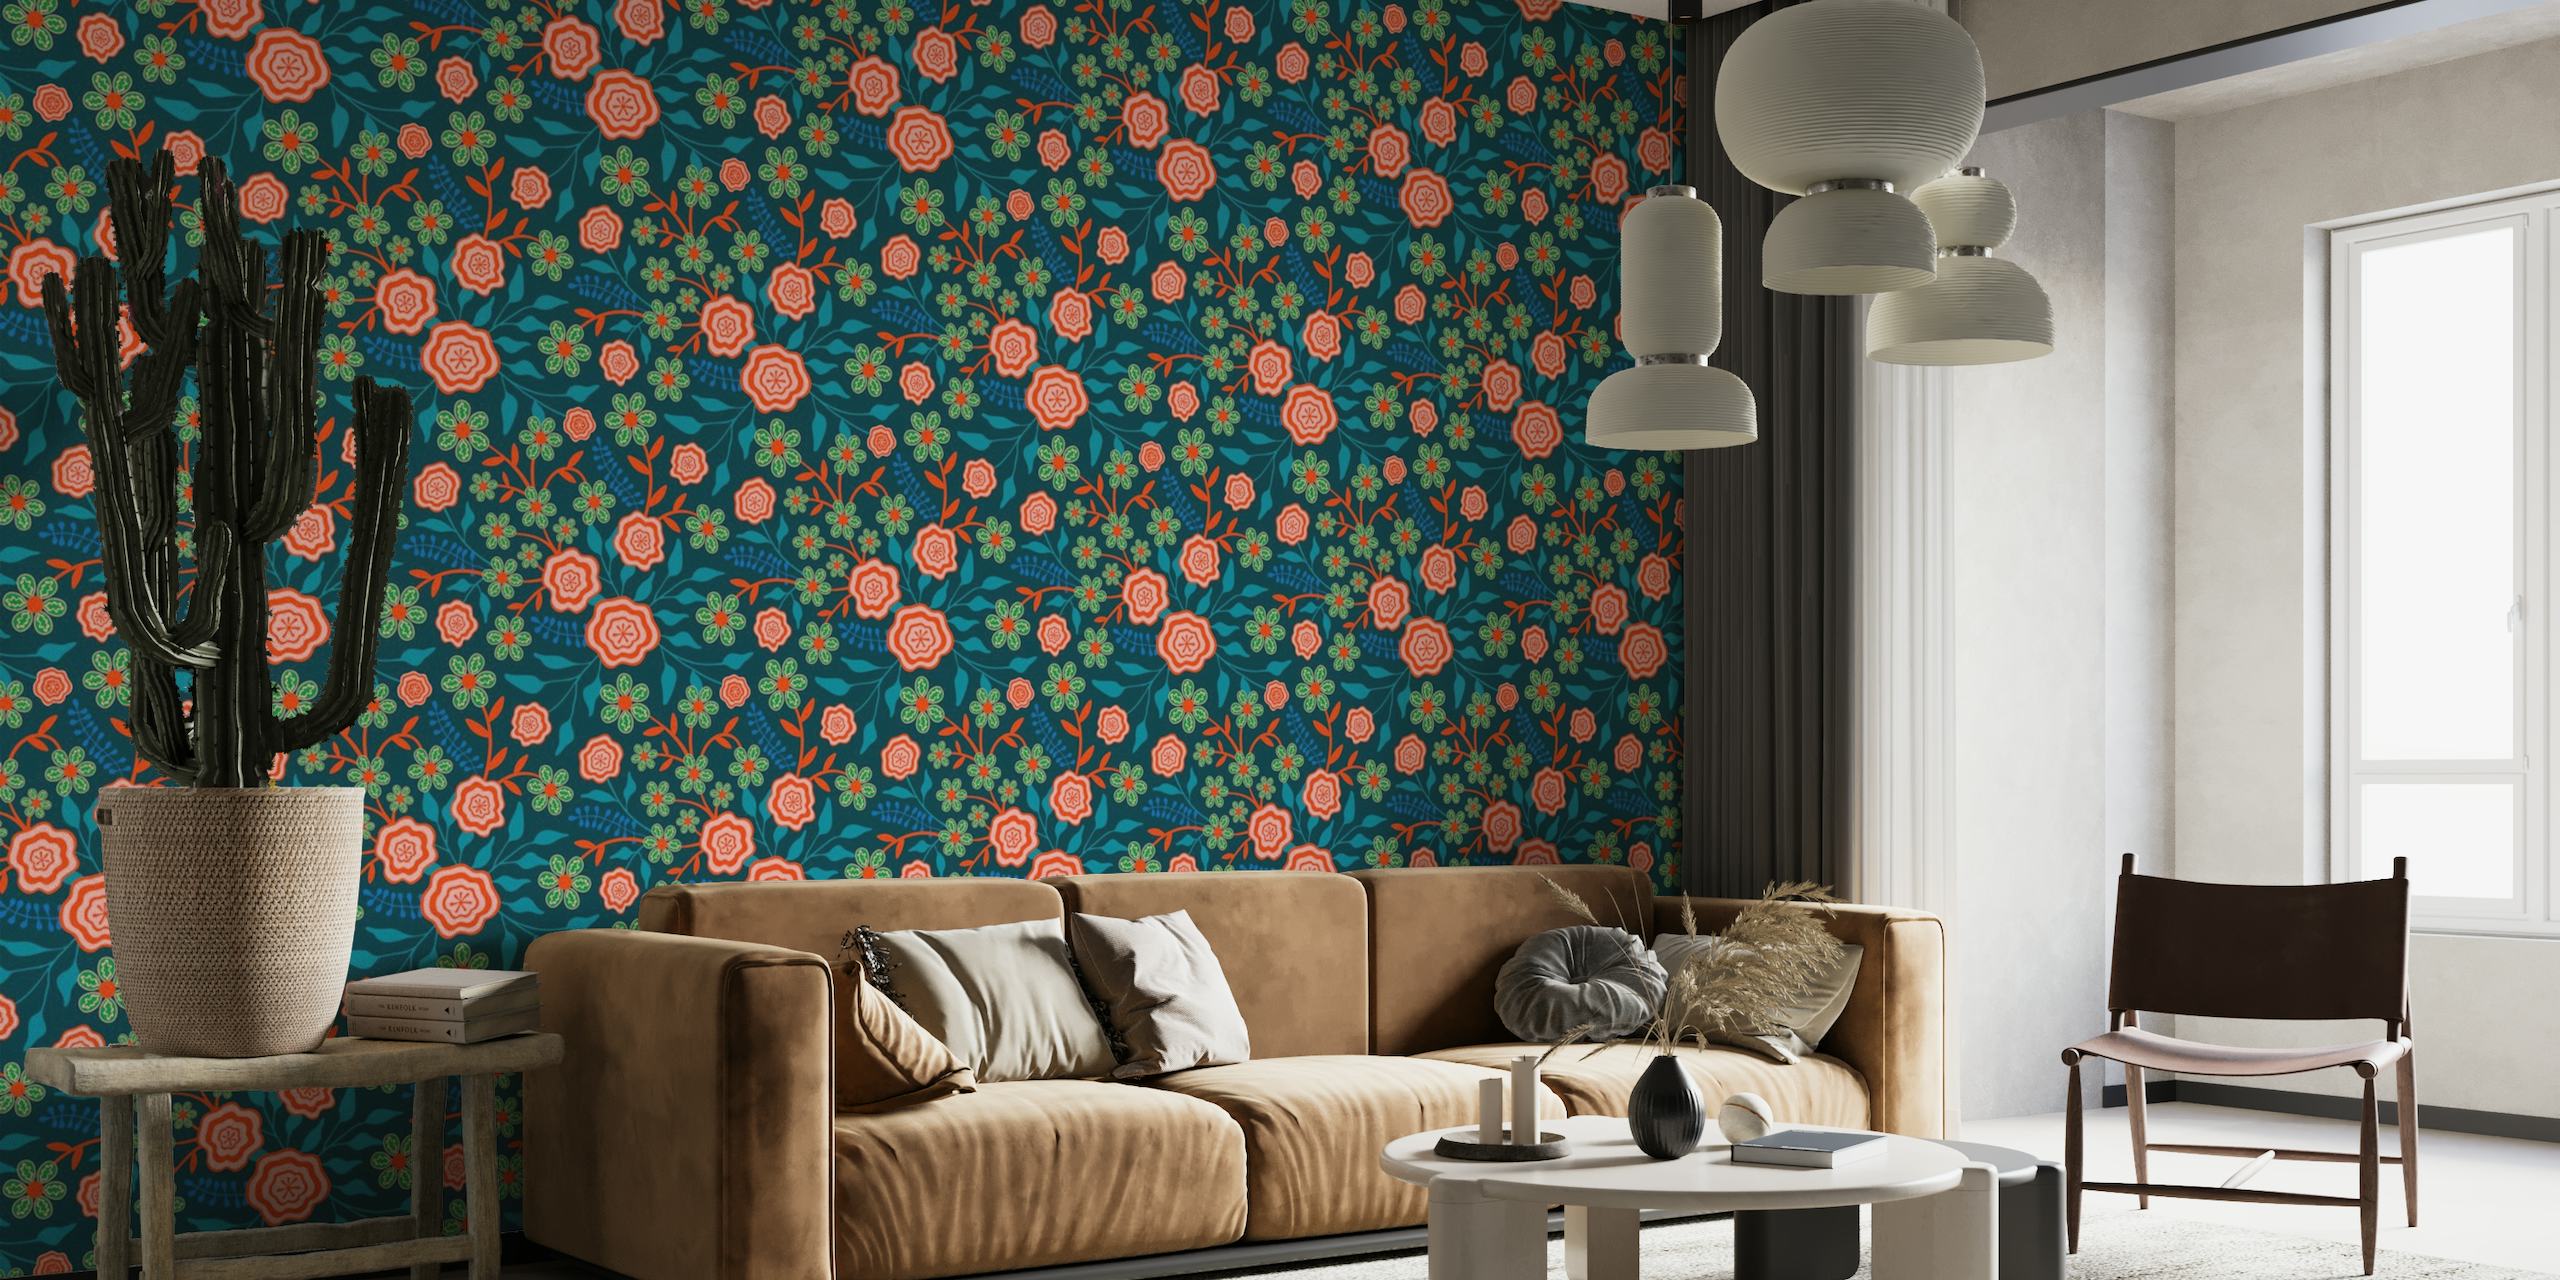 Coral and teal floral botanical wall mural on a dark background